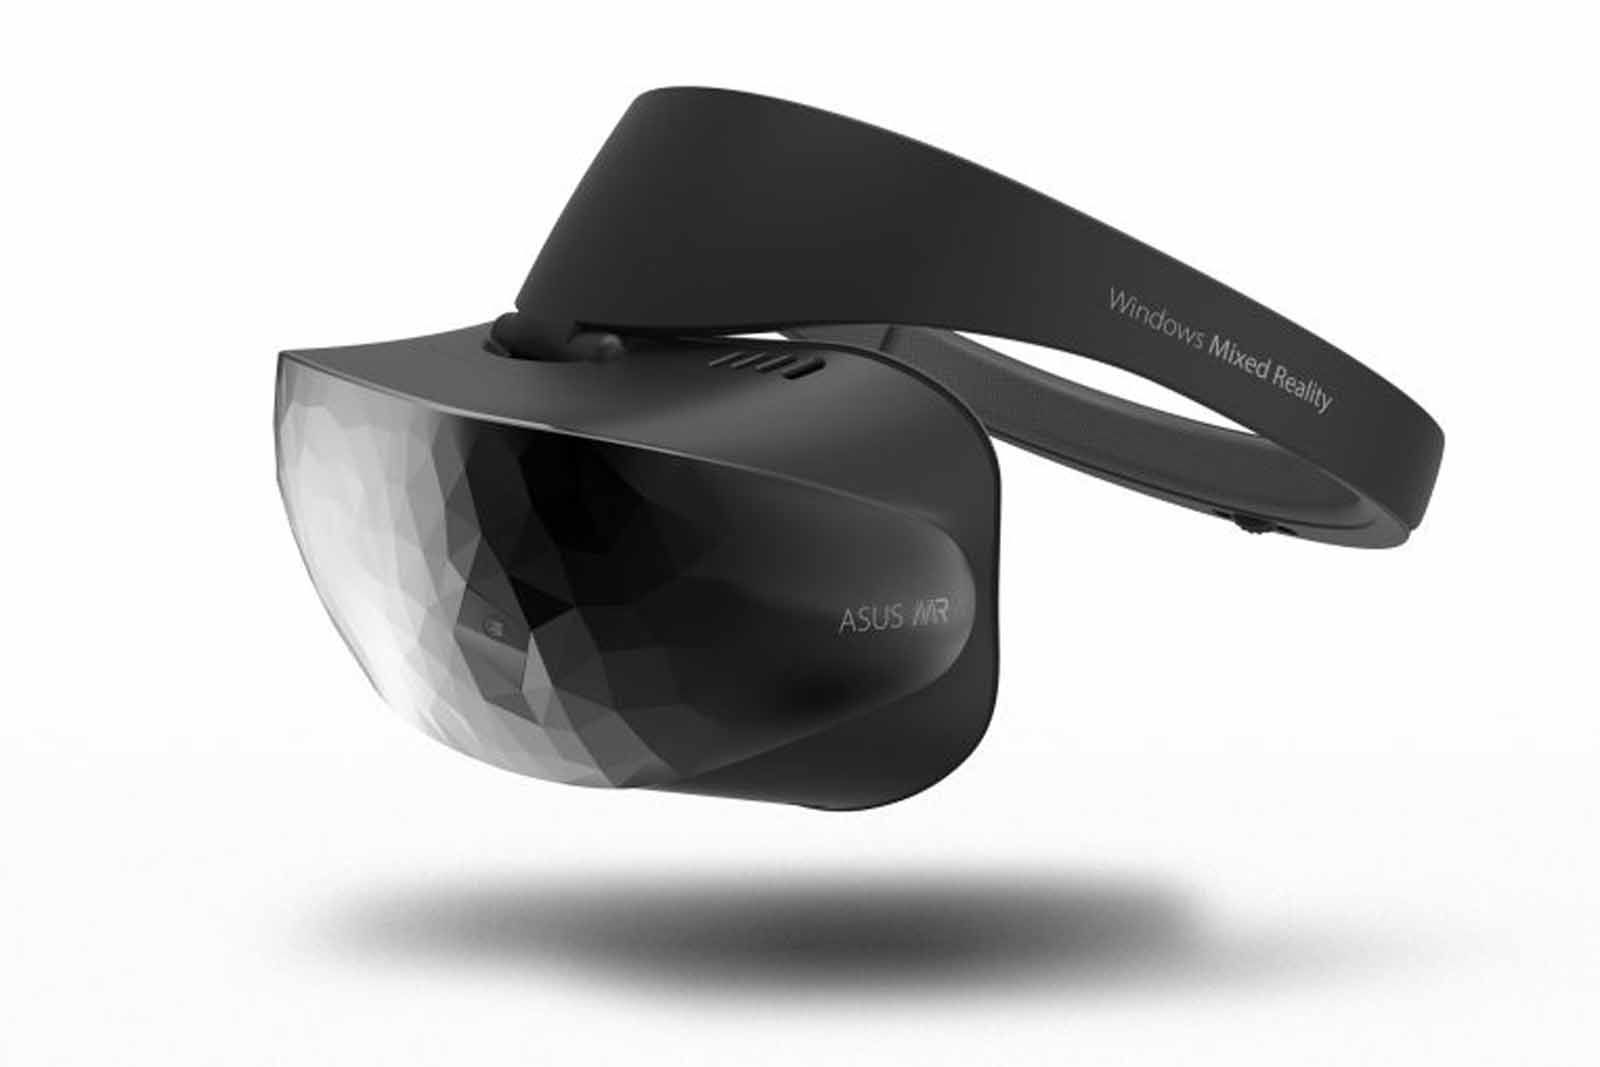 windows mixed reality headsets key features